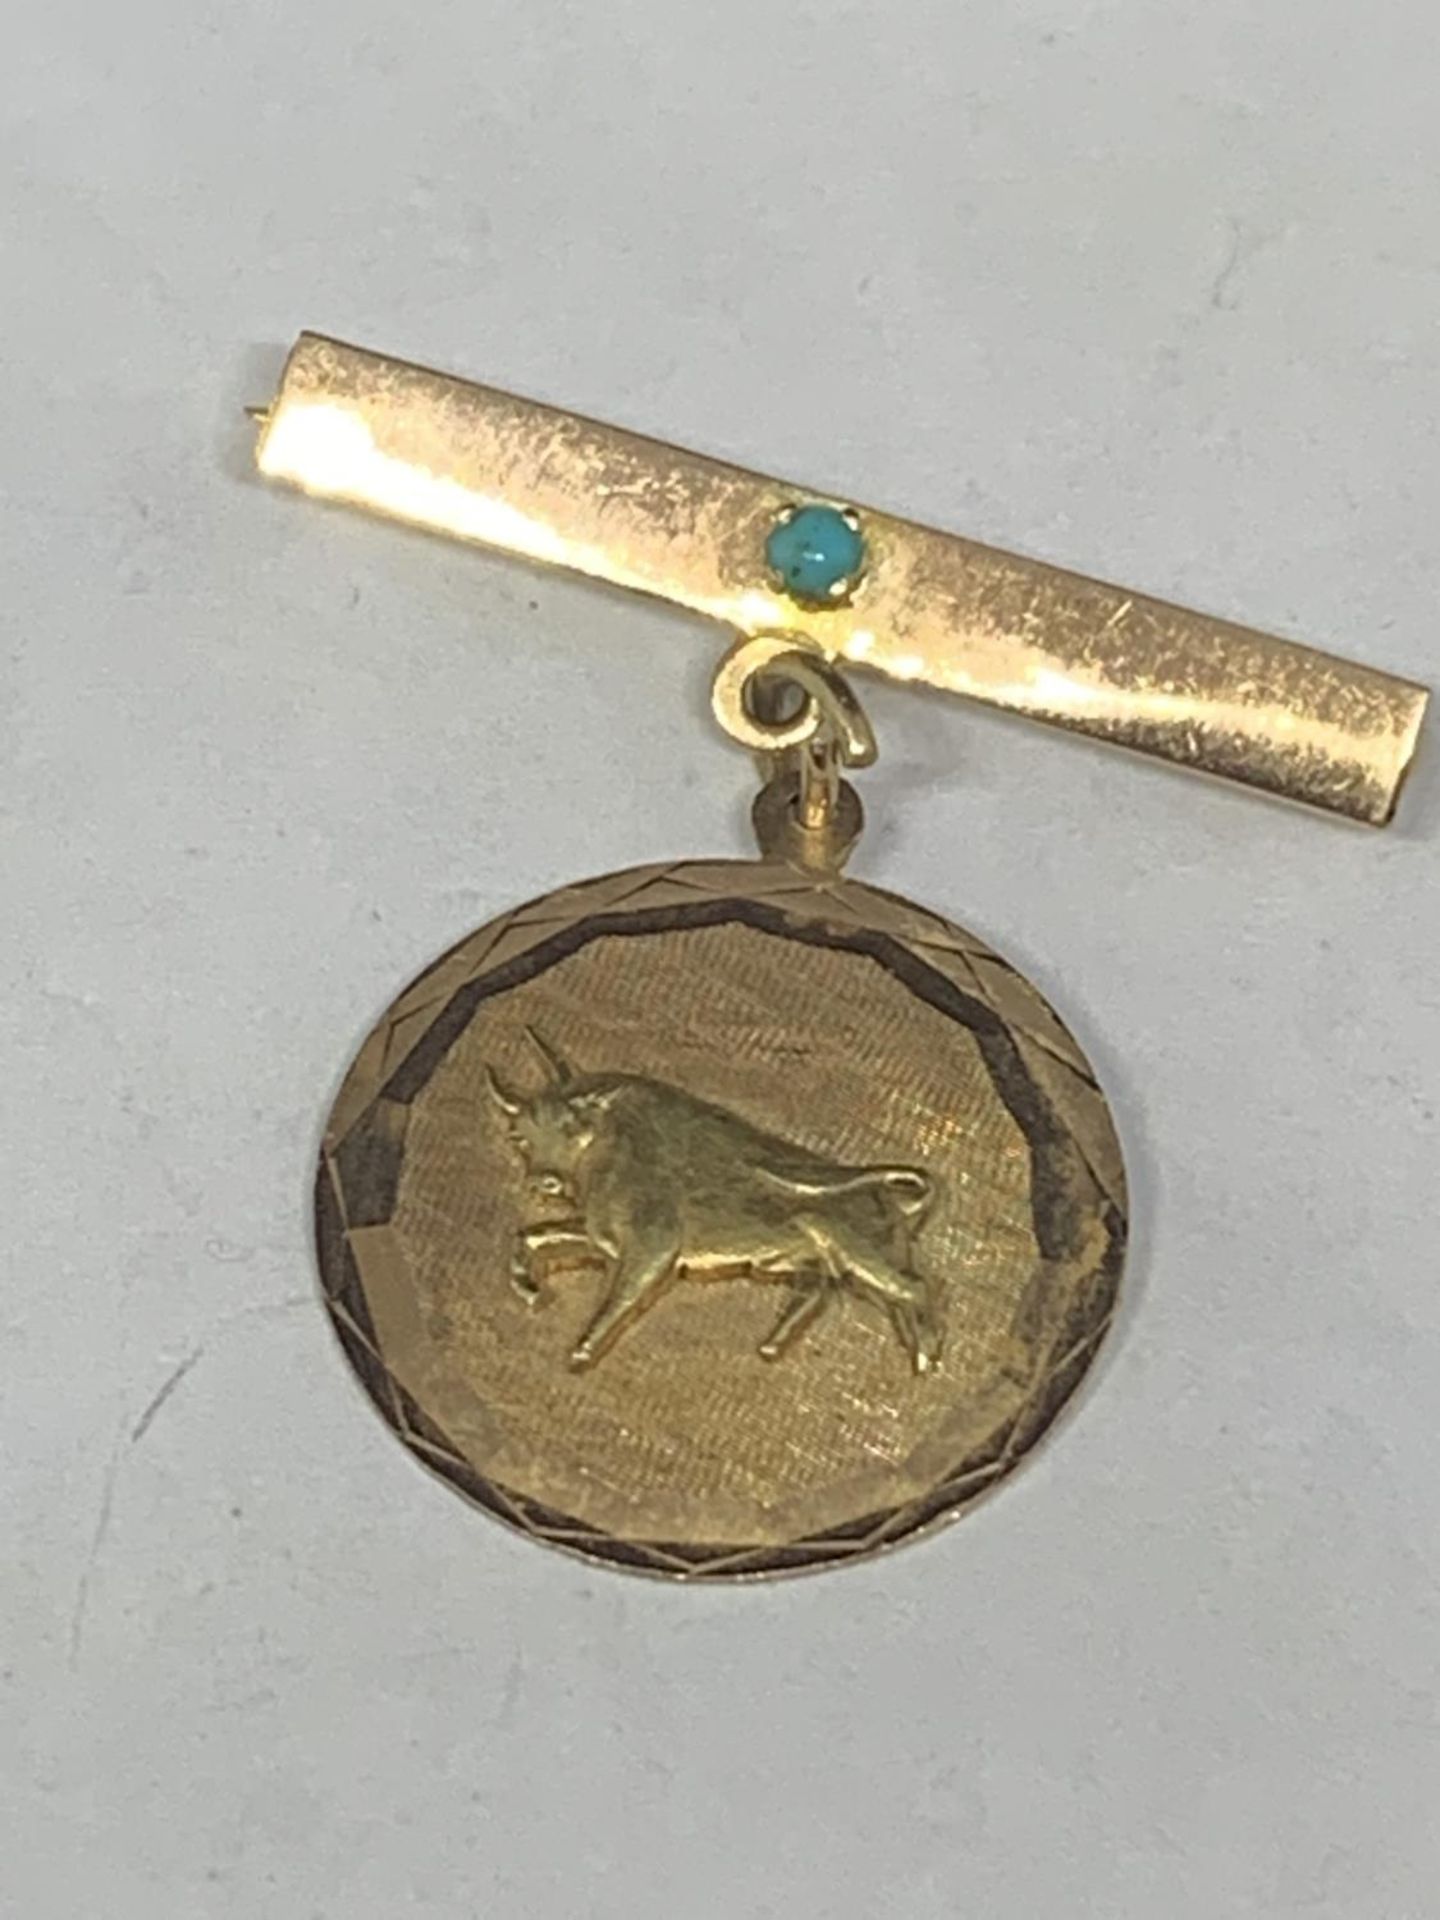 A 14 CARAT GOLD BROOCH DEPICTING TAURUS THE BULL TESTED TO AND MARKED K14 GROSS WEIGHT 3.6 GRAMS